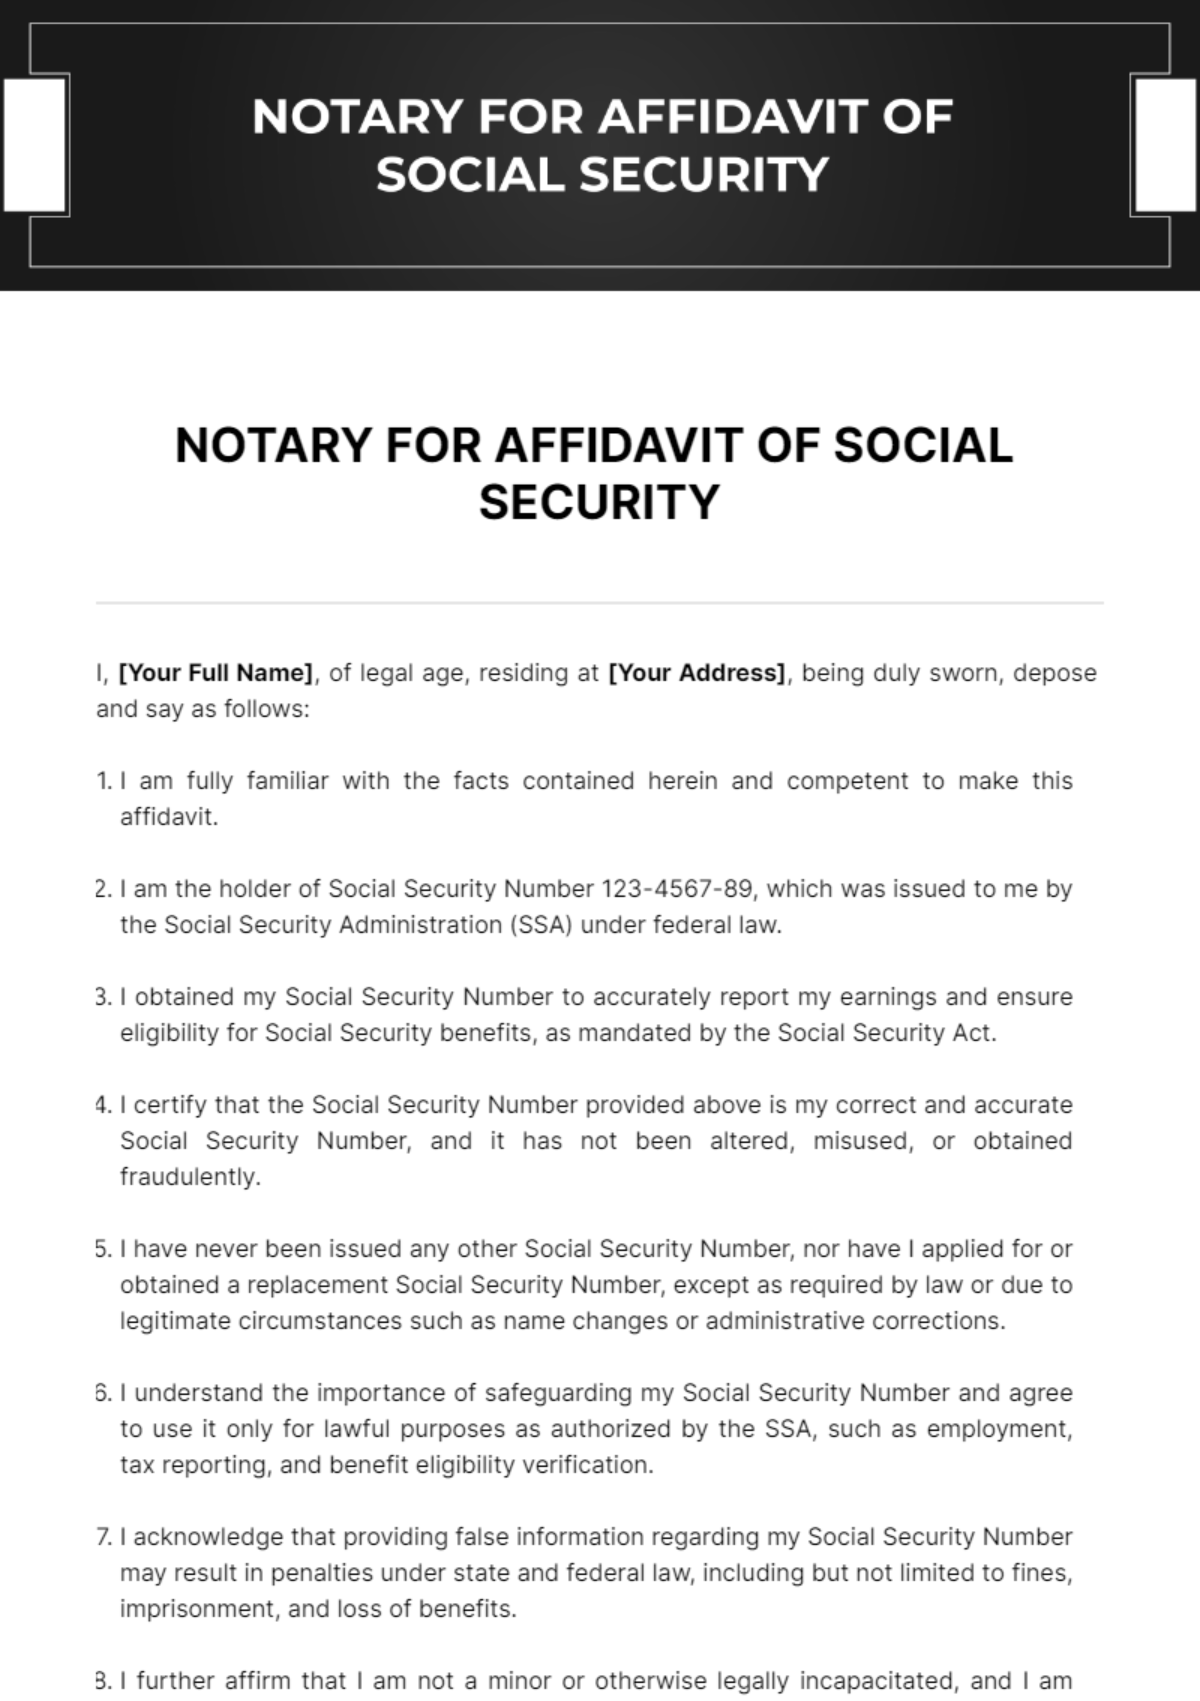 Free Notary For Affidavit Of Social Security Template